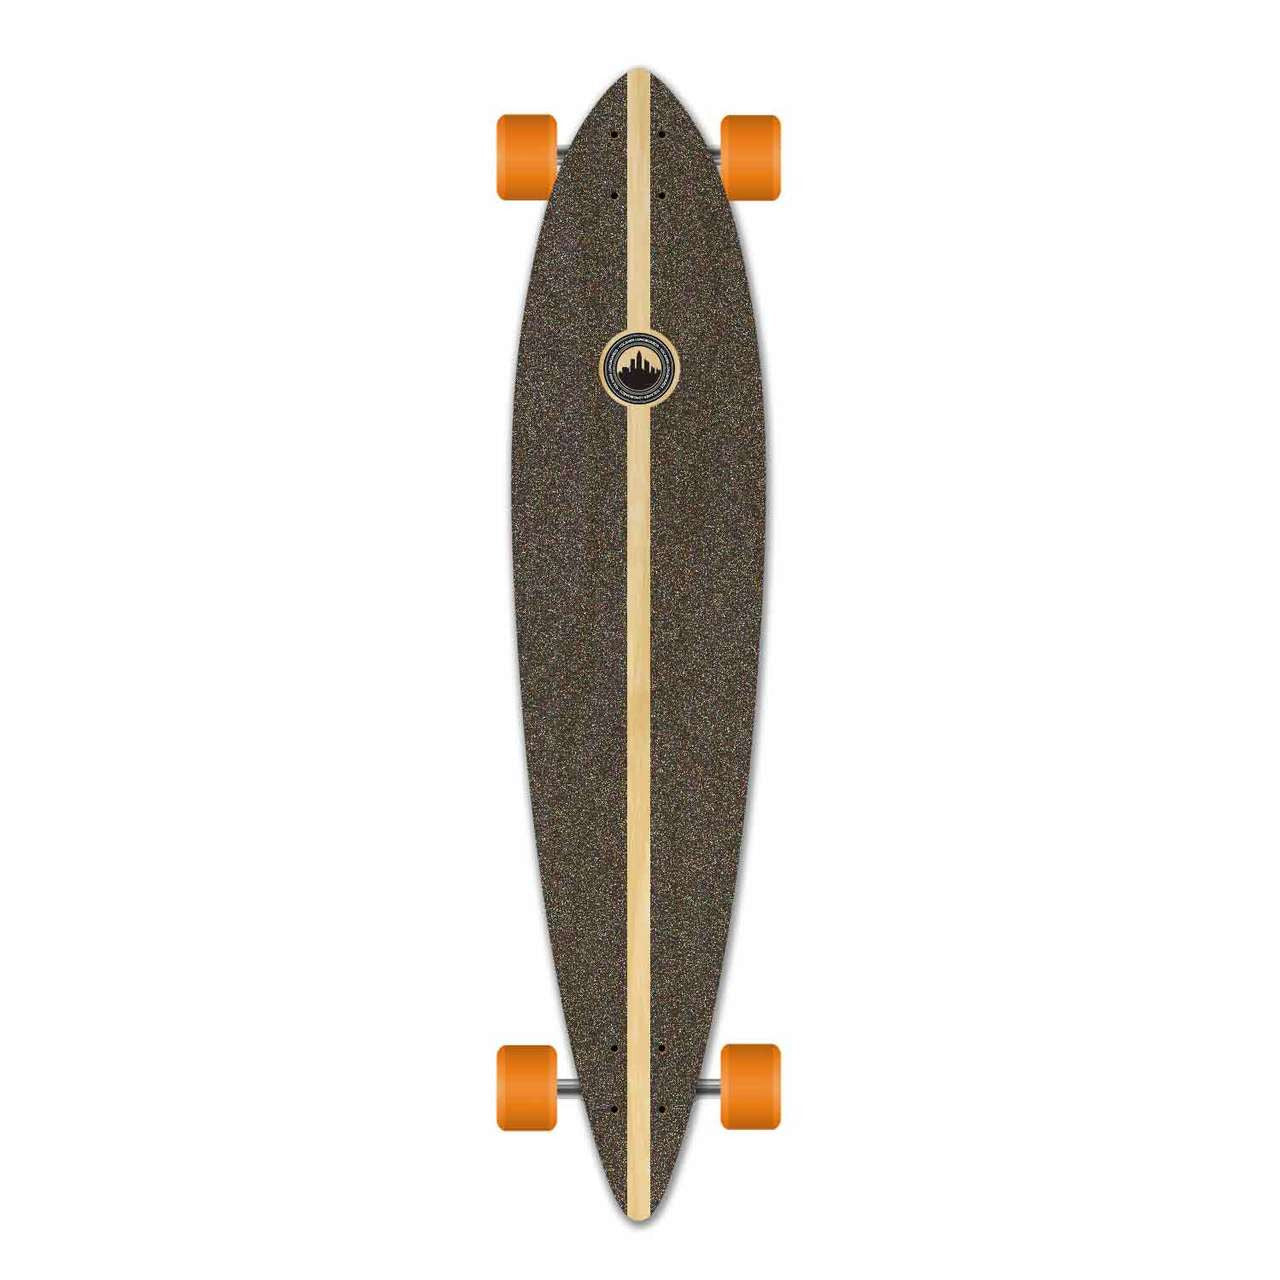 Yocaher Pintail Longboard Complete - Wave Scene